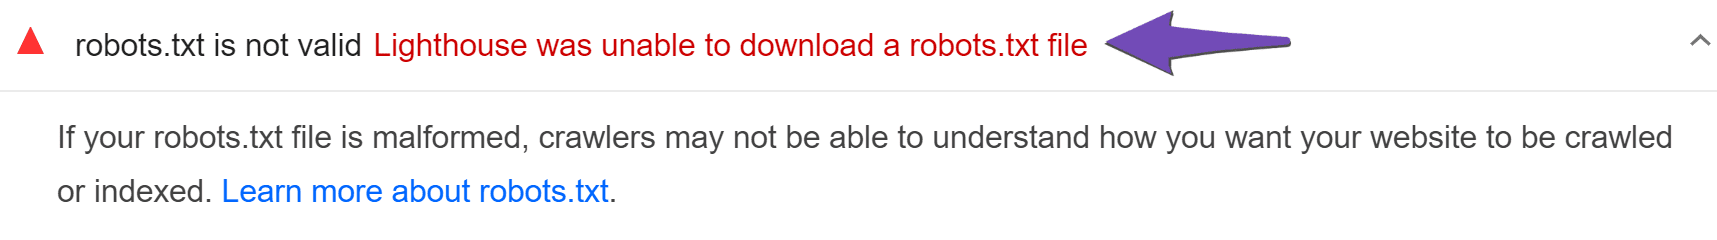 Lighthouse was unable to download robots.txt file